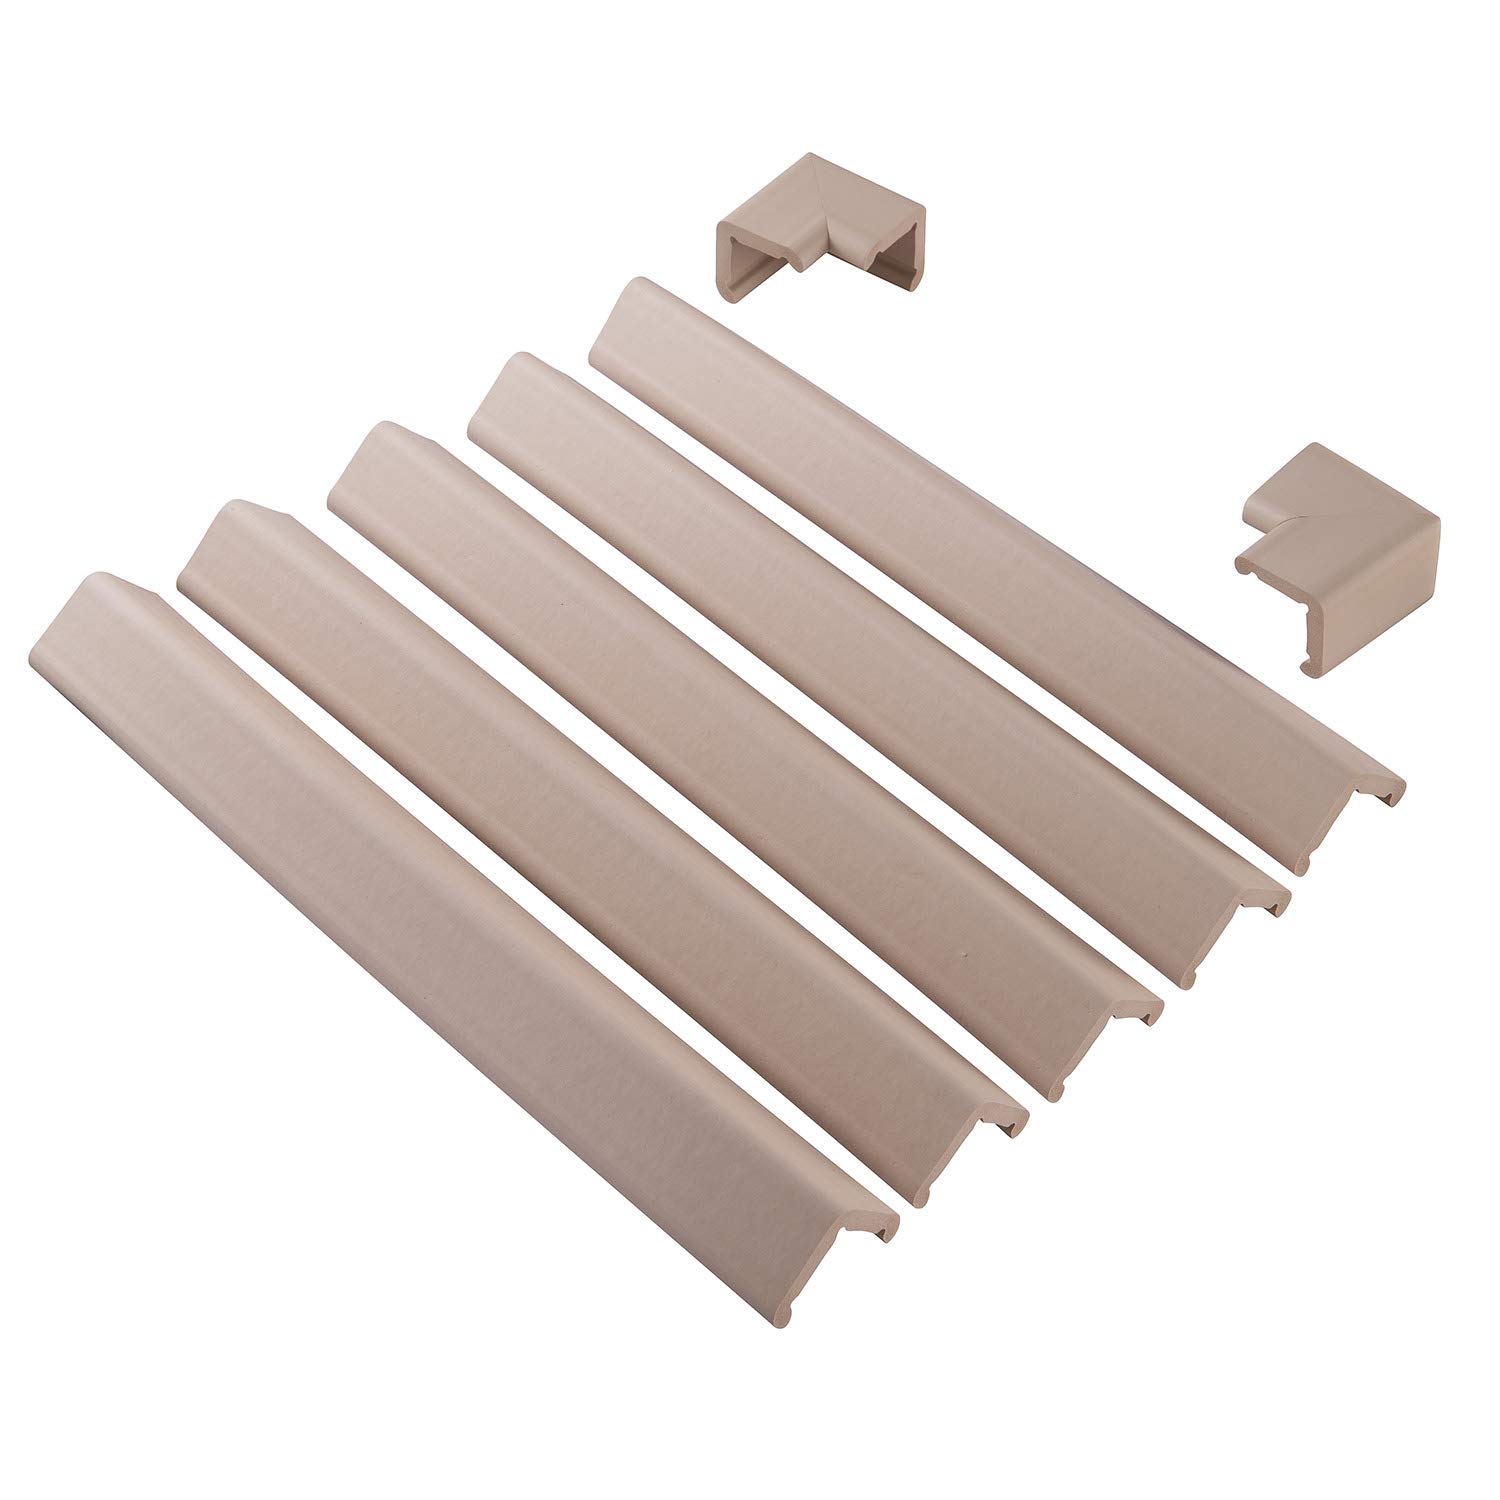 Clevamama 3052 Baby Foam Fireplace Edge Protection Set 7-Piece Beige 500 g